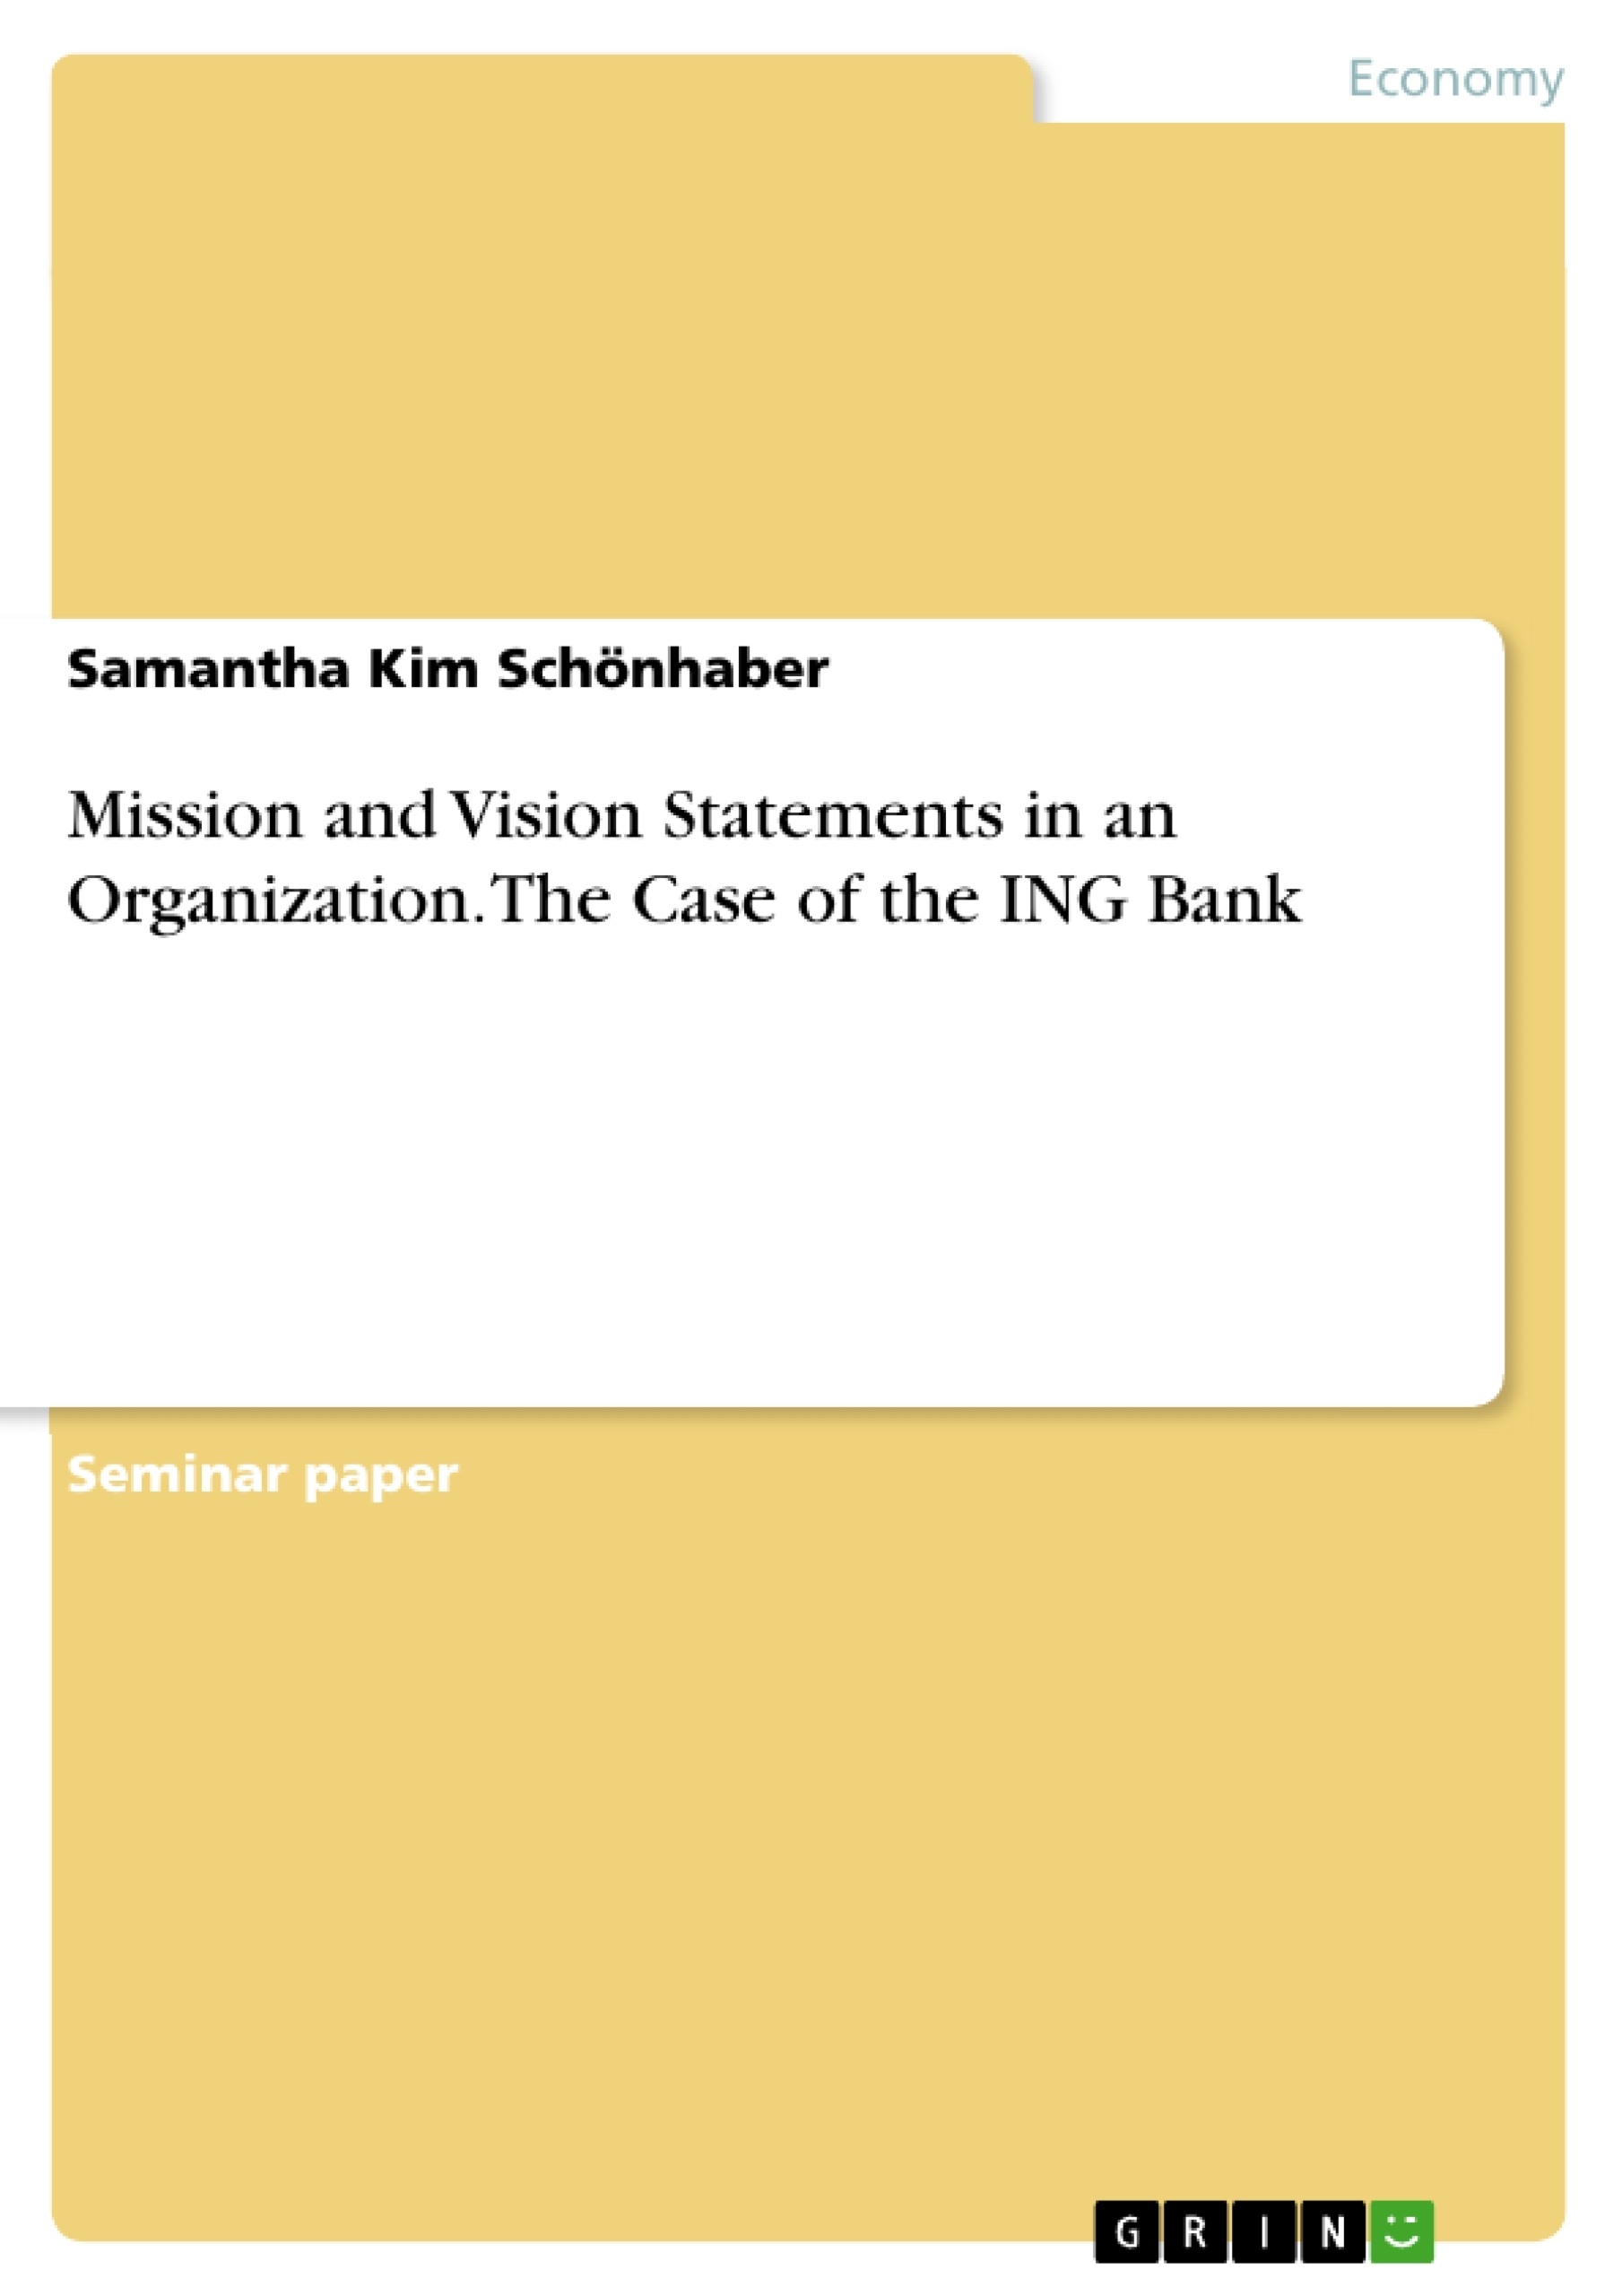 Titre: Mission and Vision Statements in an Organization. The Case of the ING Bank